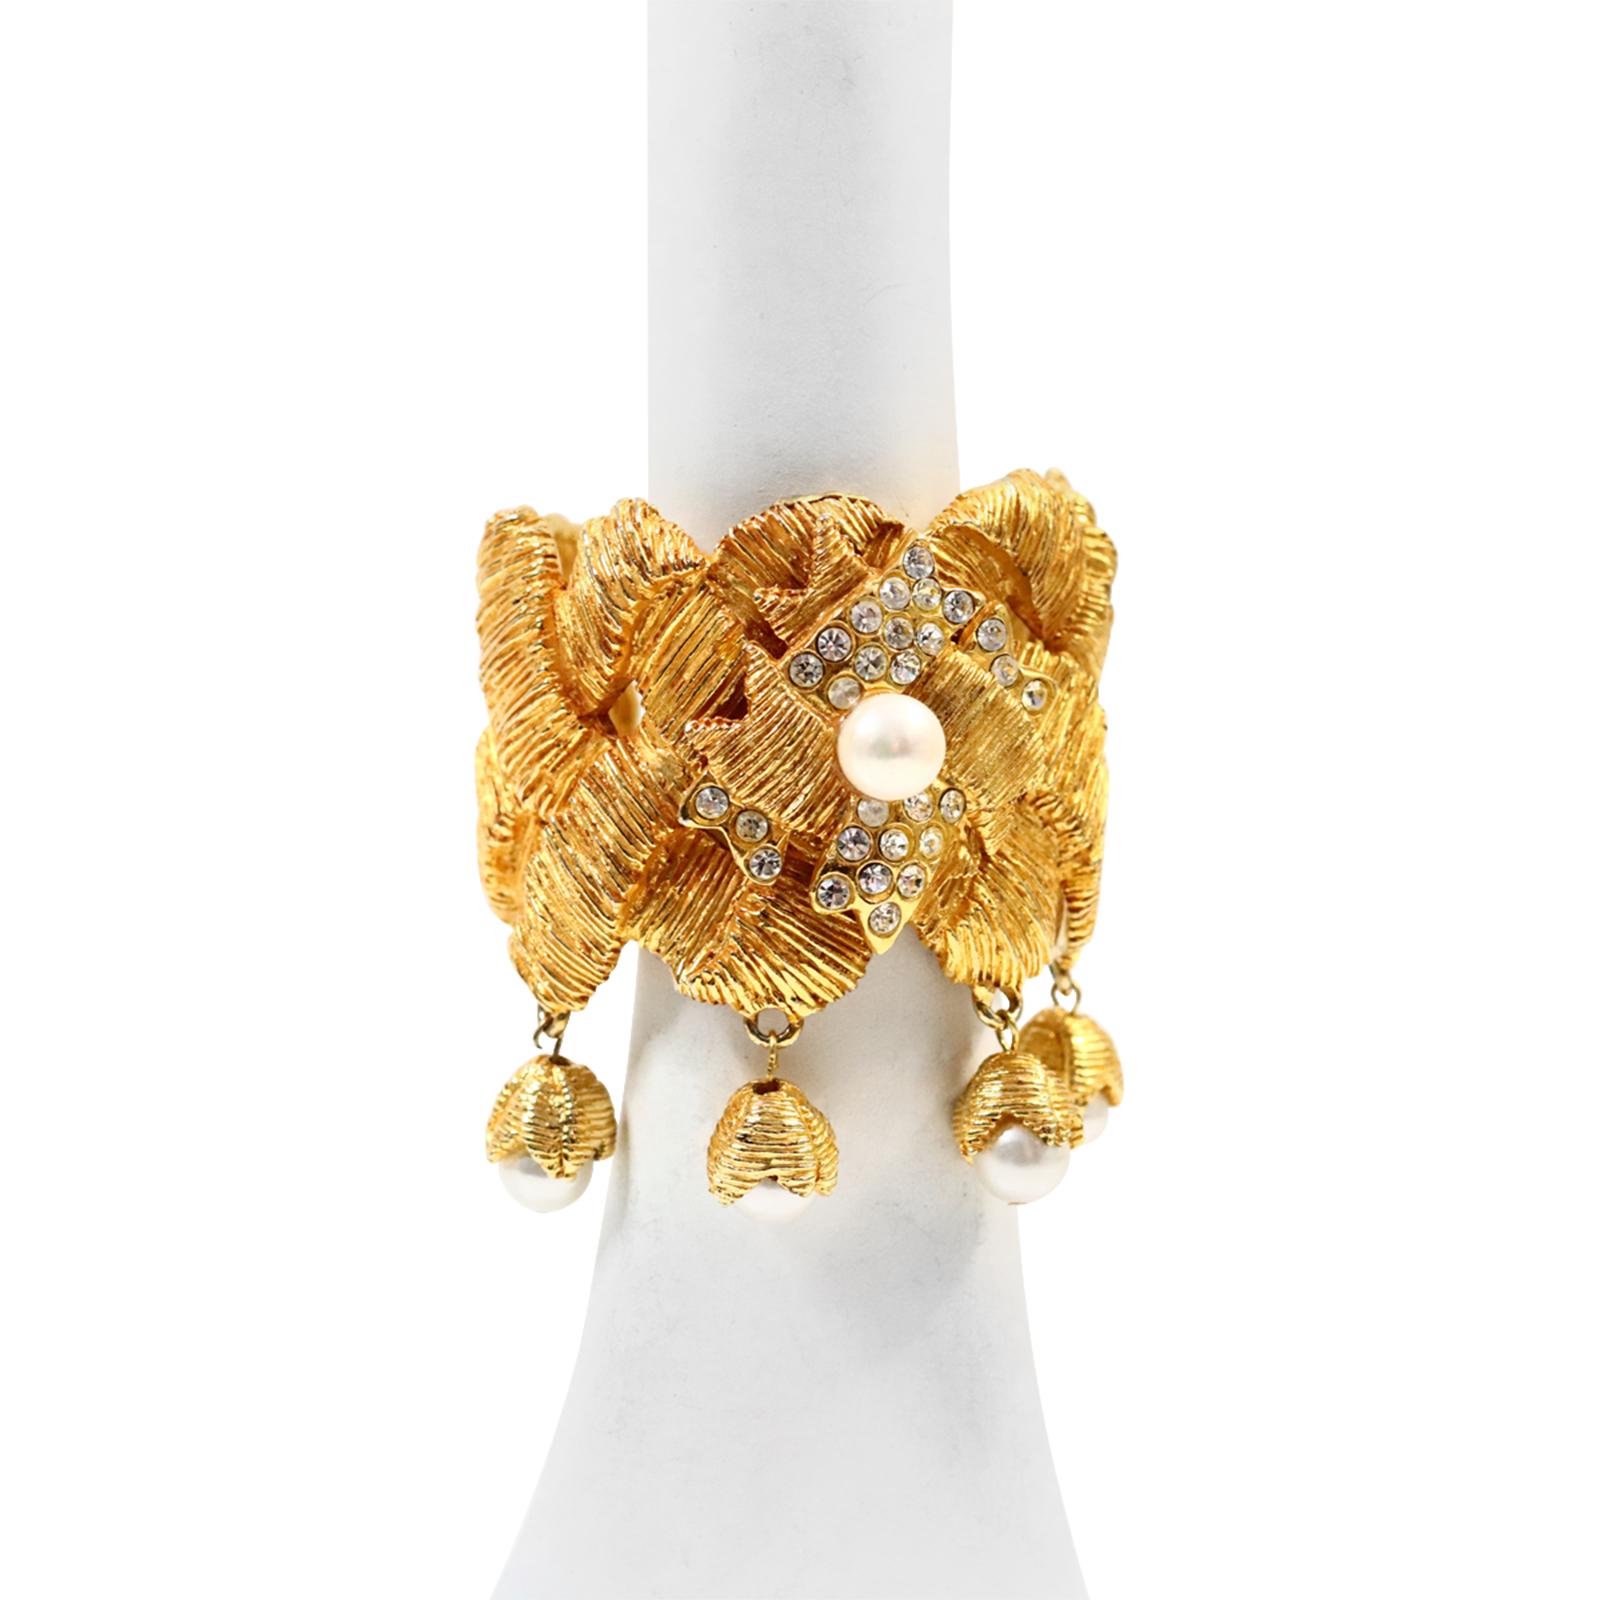 Vintage Lorenz Baumer Gold Diamante Faux Pearl Bracelet Circa 1980s. This is such a gorgeous bracelet with lattice work that then has four dangling pearls.  There is a set of earrings on site that goes with this. From the design you can see why